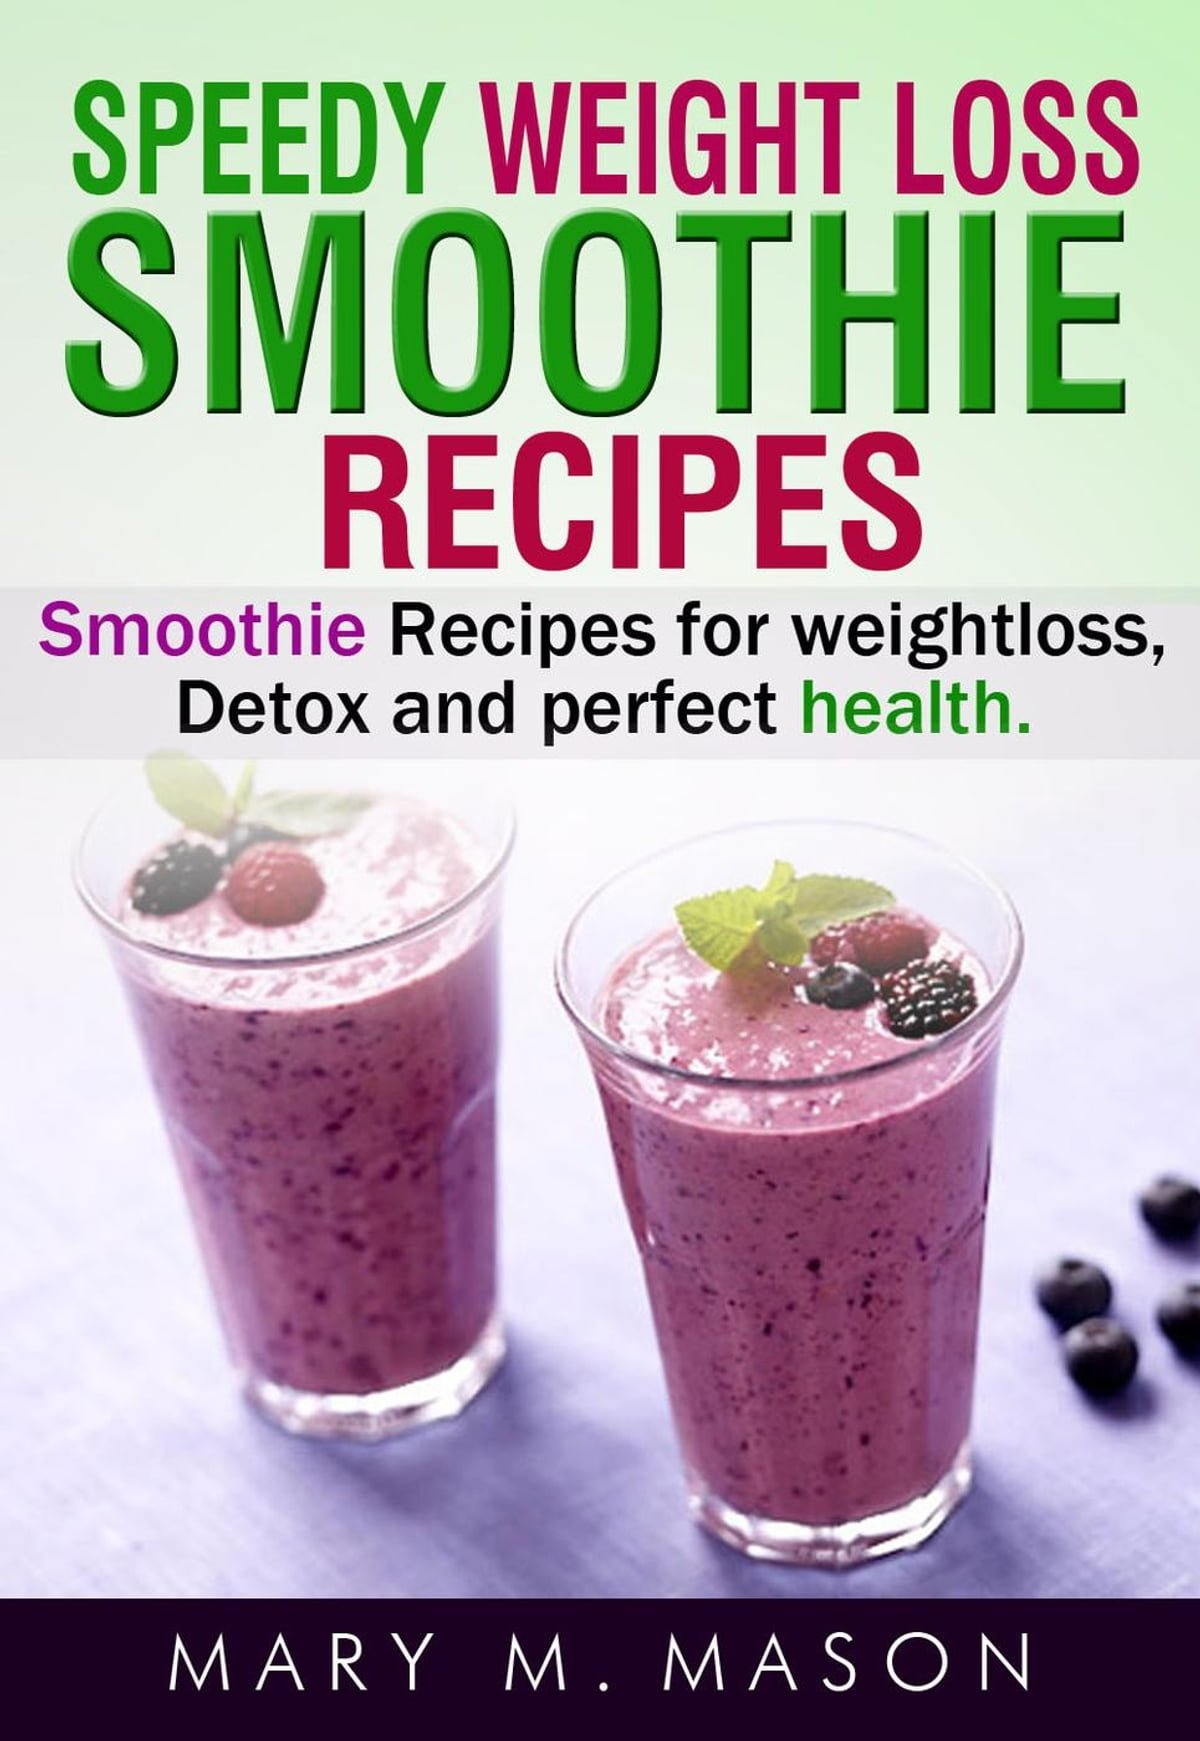 healthy smoothies for weight loss jackson nash inti revista org